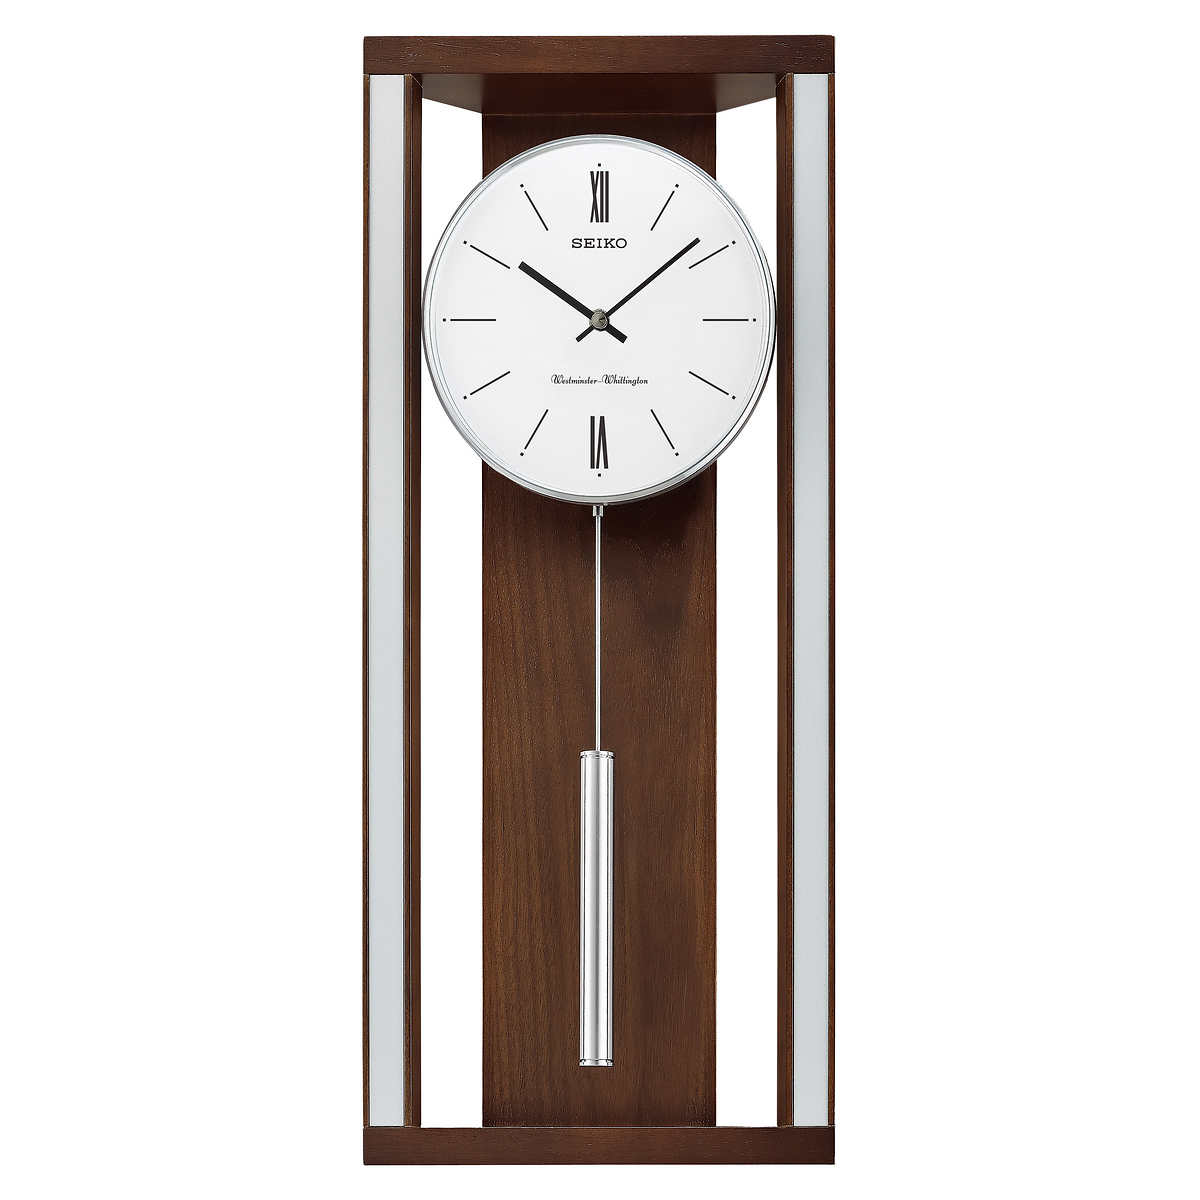 Seiko Wall Clock with Pendulum and Dual Chimes - $69.97 (YMMV, in store only)